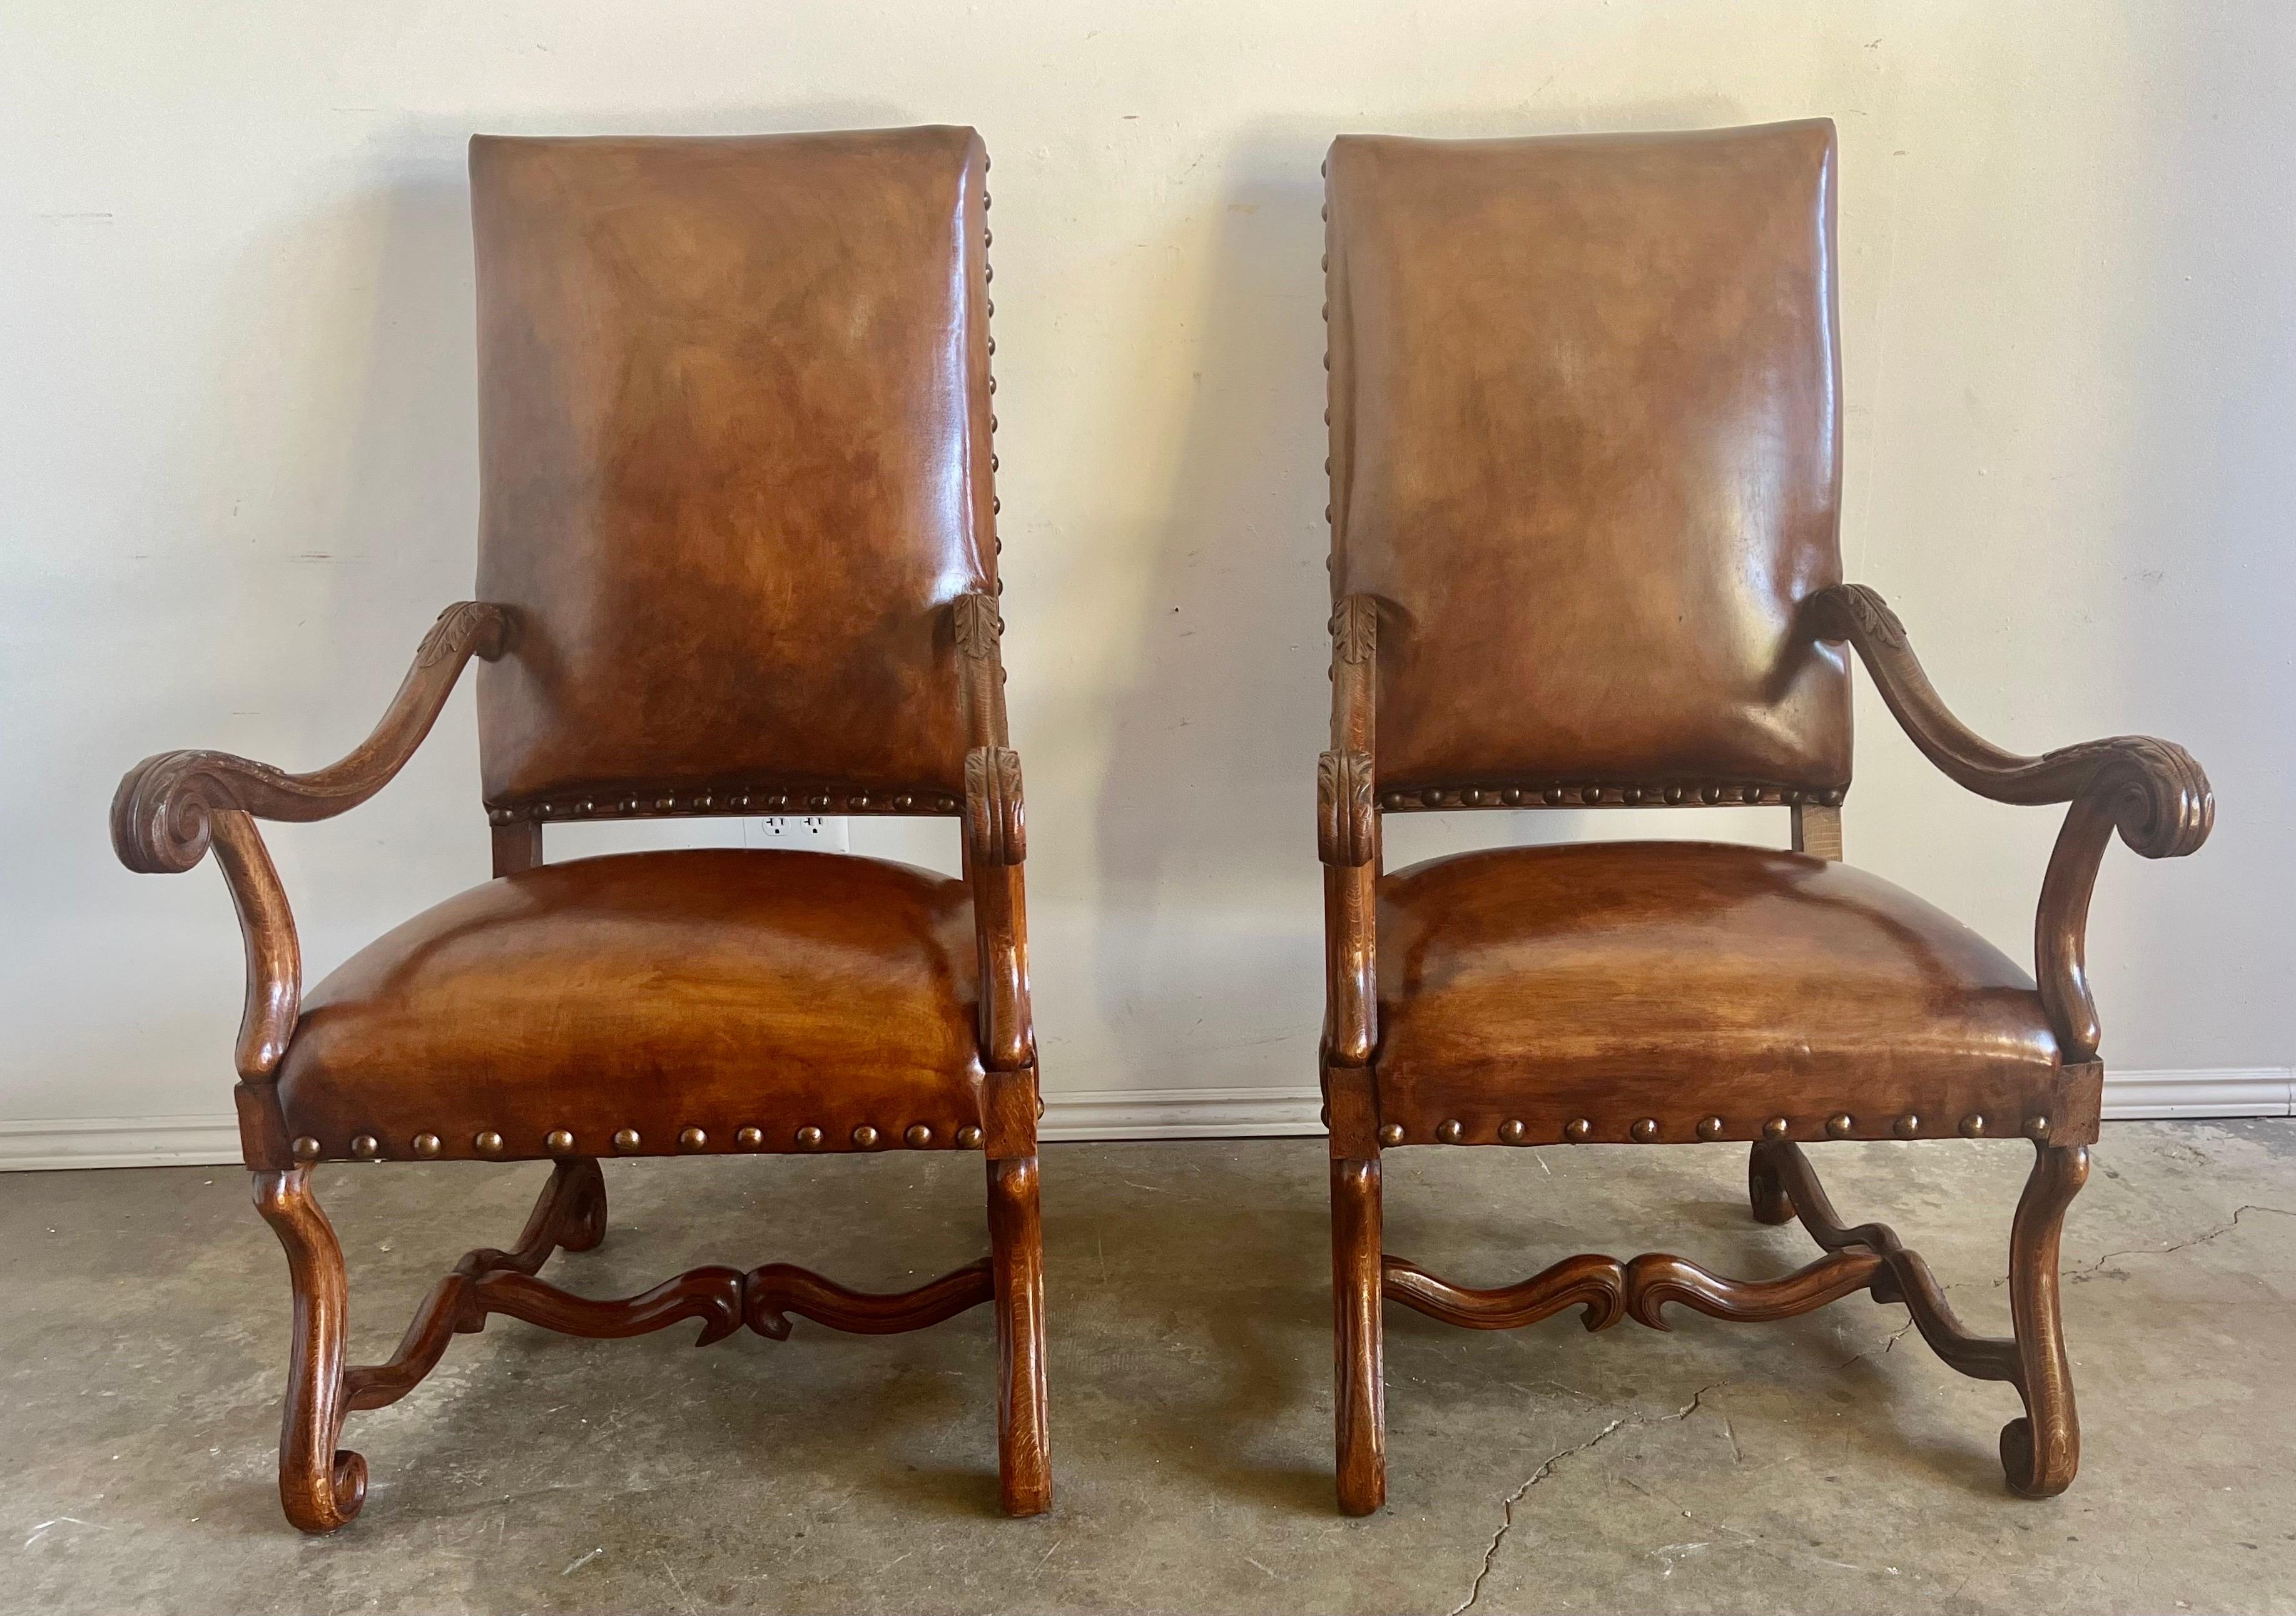 Pair of grand scale leather armchairs upholstered in Tobacco colored leather and finished with nailhead trim detail.